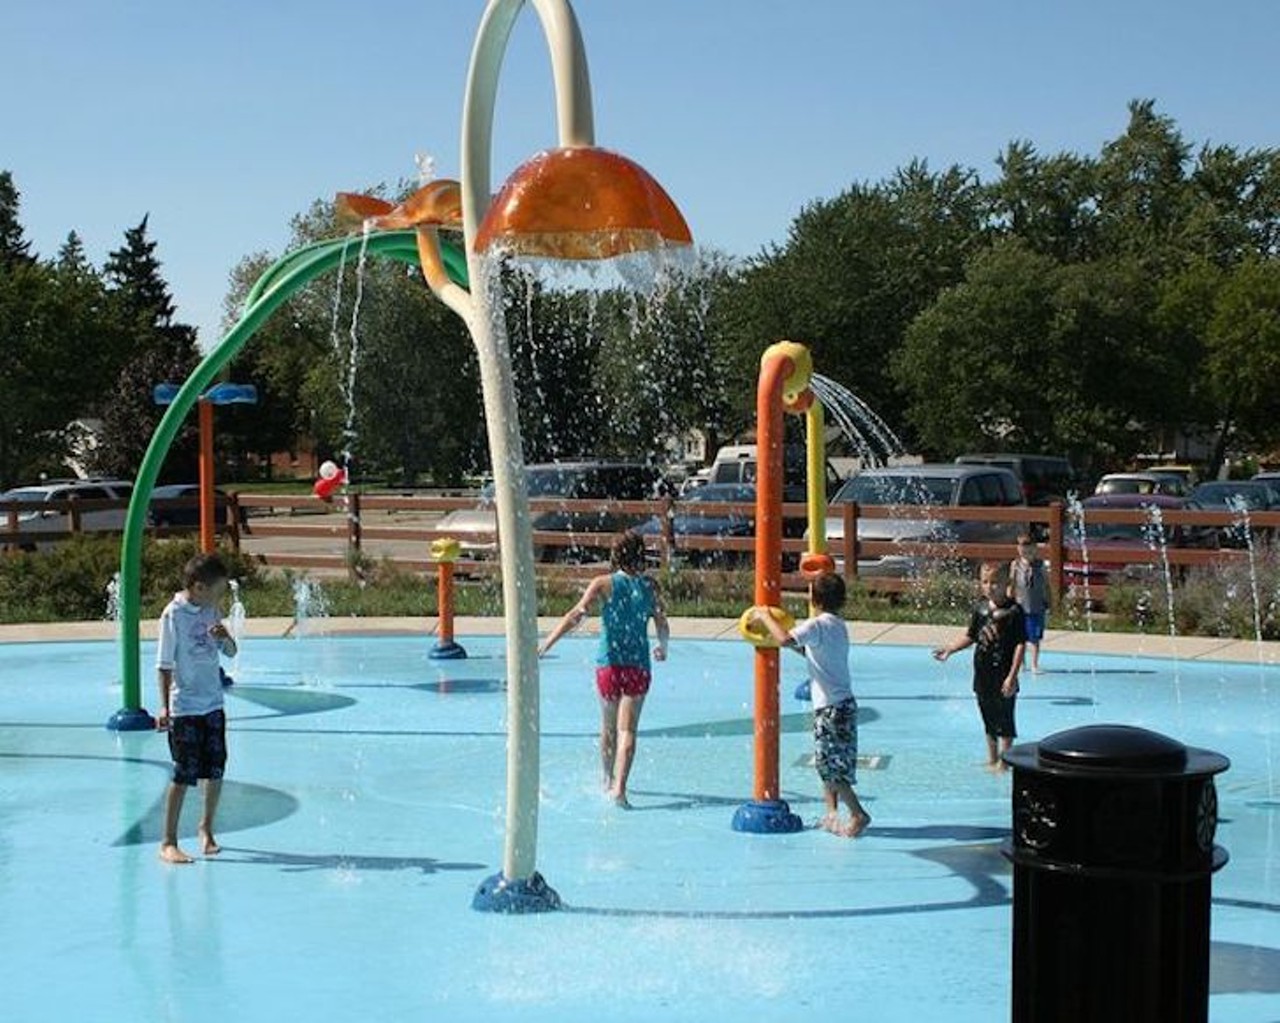 Van Houten Park Splash Pad
6000 Silvery Ln., Dearborn Heights; 313-791-3600; dearborn-heights.mi.us
The Van Houten spray park is designed with warm weather in mind (literally, the park won&#146;t operate below 70 degrees). Located in Dearborn Heights, it&#146;s the perfect place for kids to splash around.